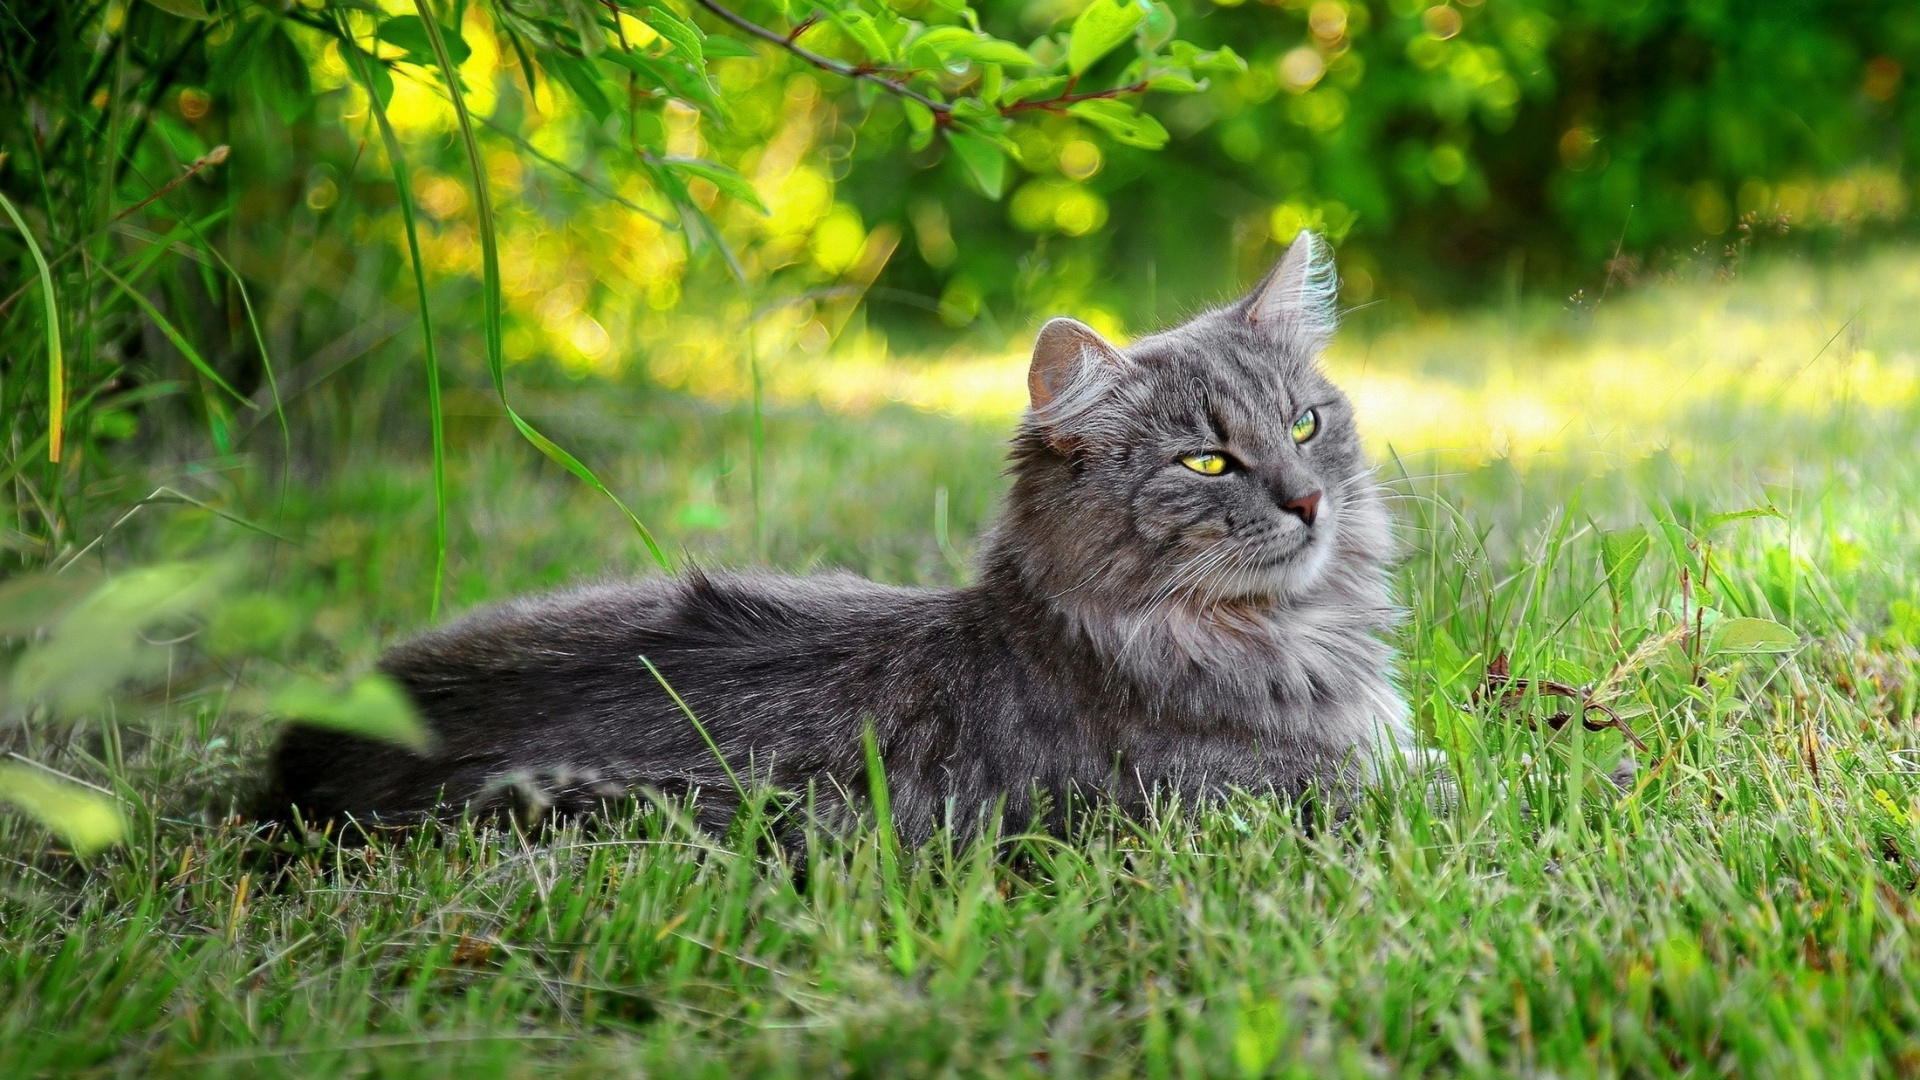 Brown Tabby Cat on Green Grass During Daytime. Wallpaper in 1920x1080 Resolution